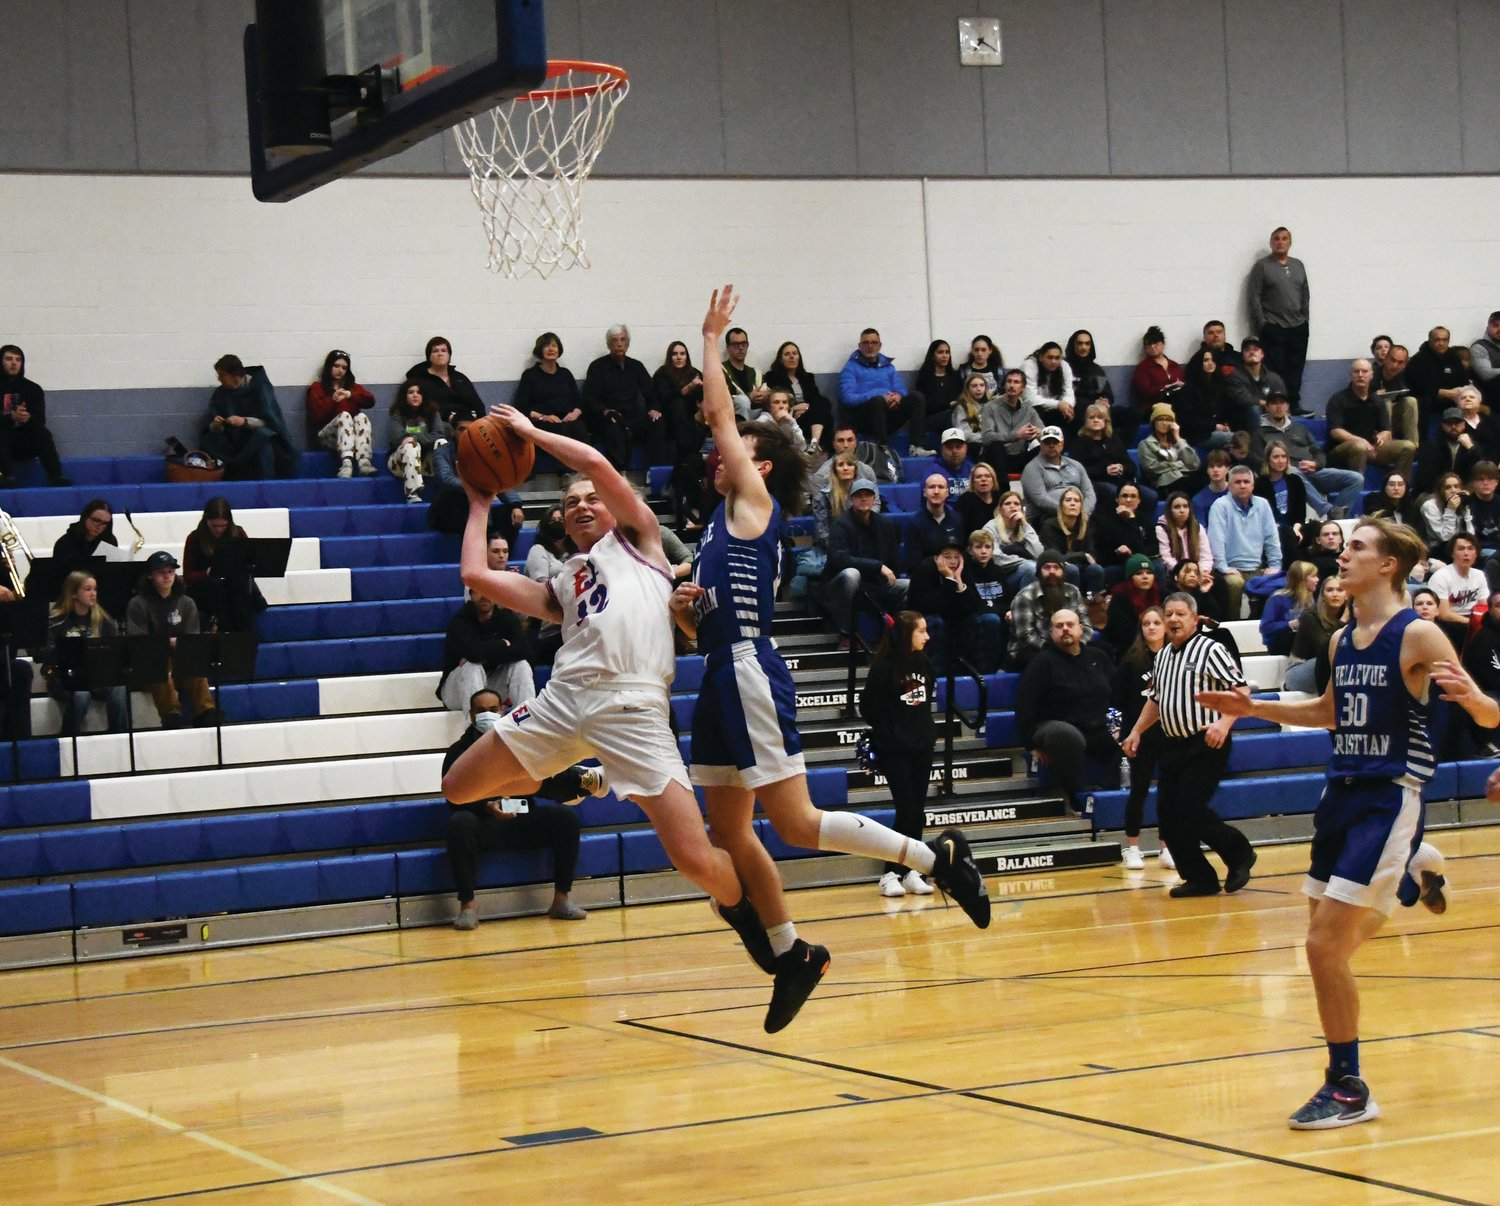 Rivals senior Michael Petta shoots a contested layup in the first half versus the Bellevue Christian Vikings.